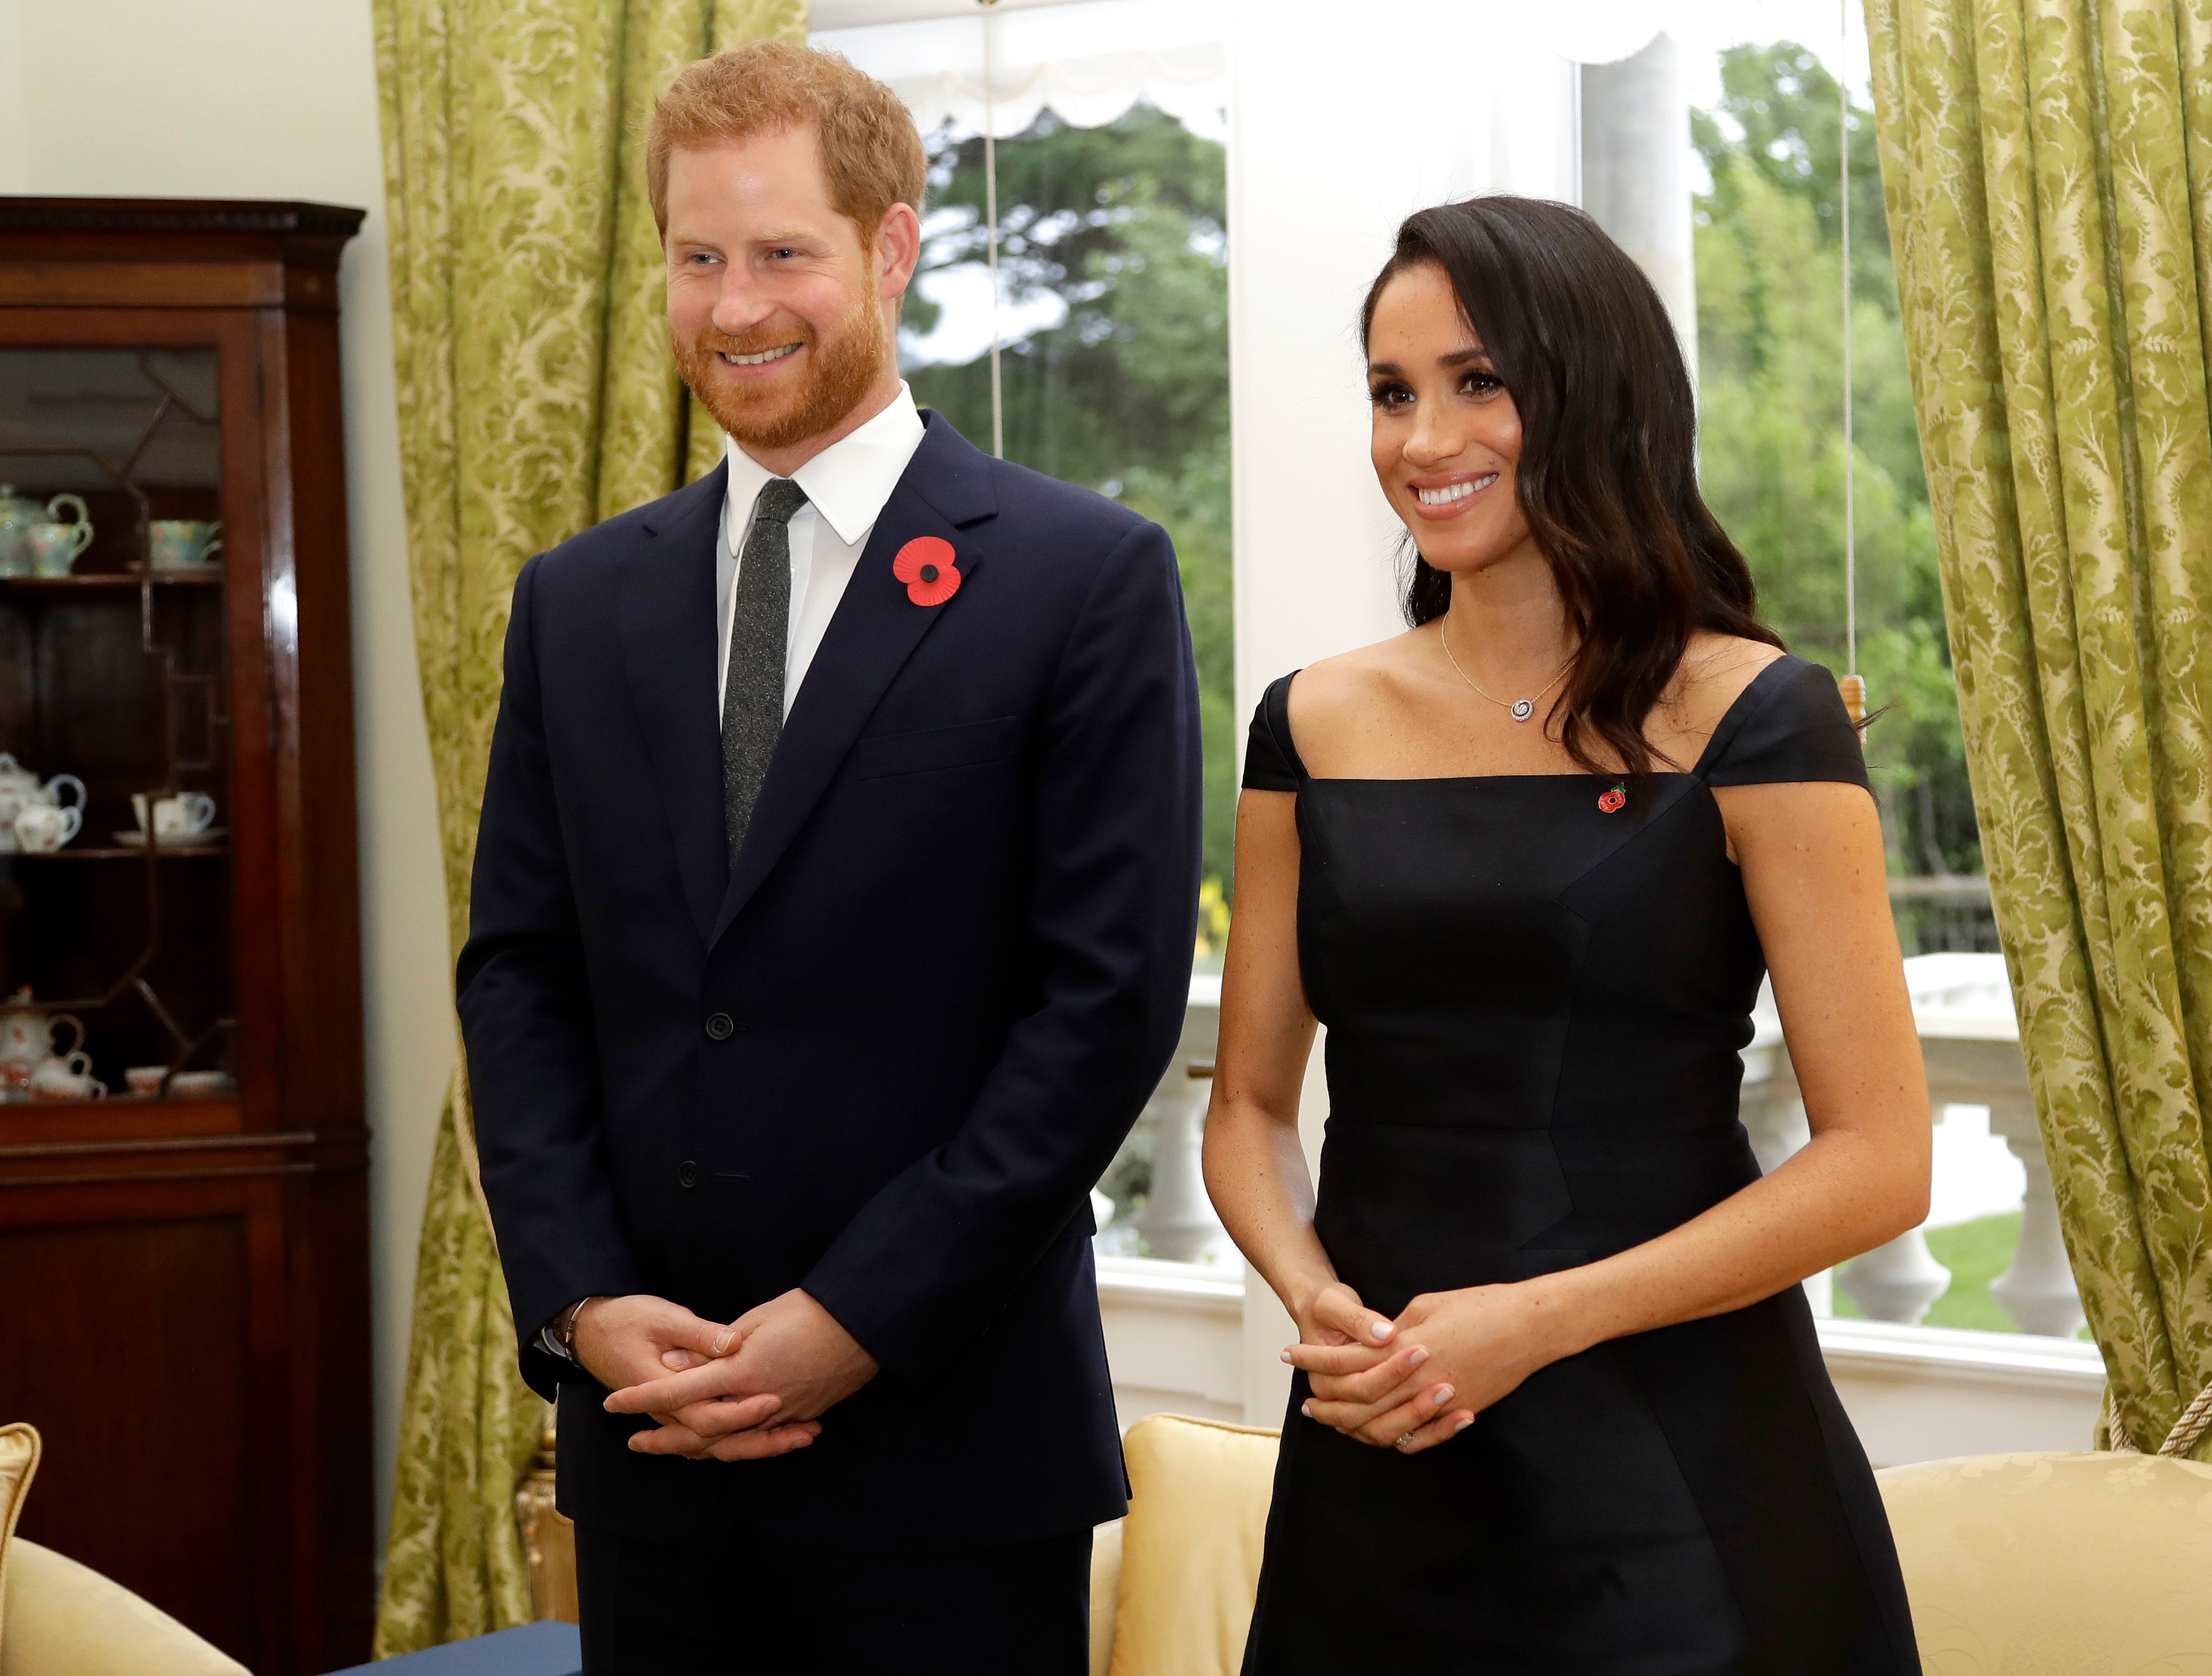 Prince Harry and Duchess Meghan wait to meet New Zealand Prime Minister Jacinda Ardern on October 28, 2018, in Wellington, New Zealand | Photo: Kirsty Wigglesworth - Pool /Getty Images